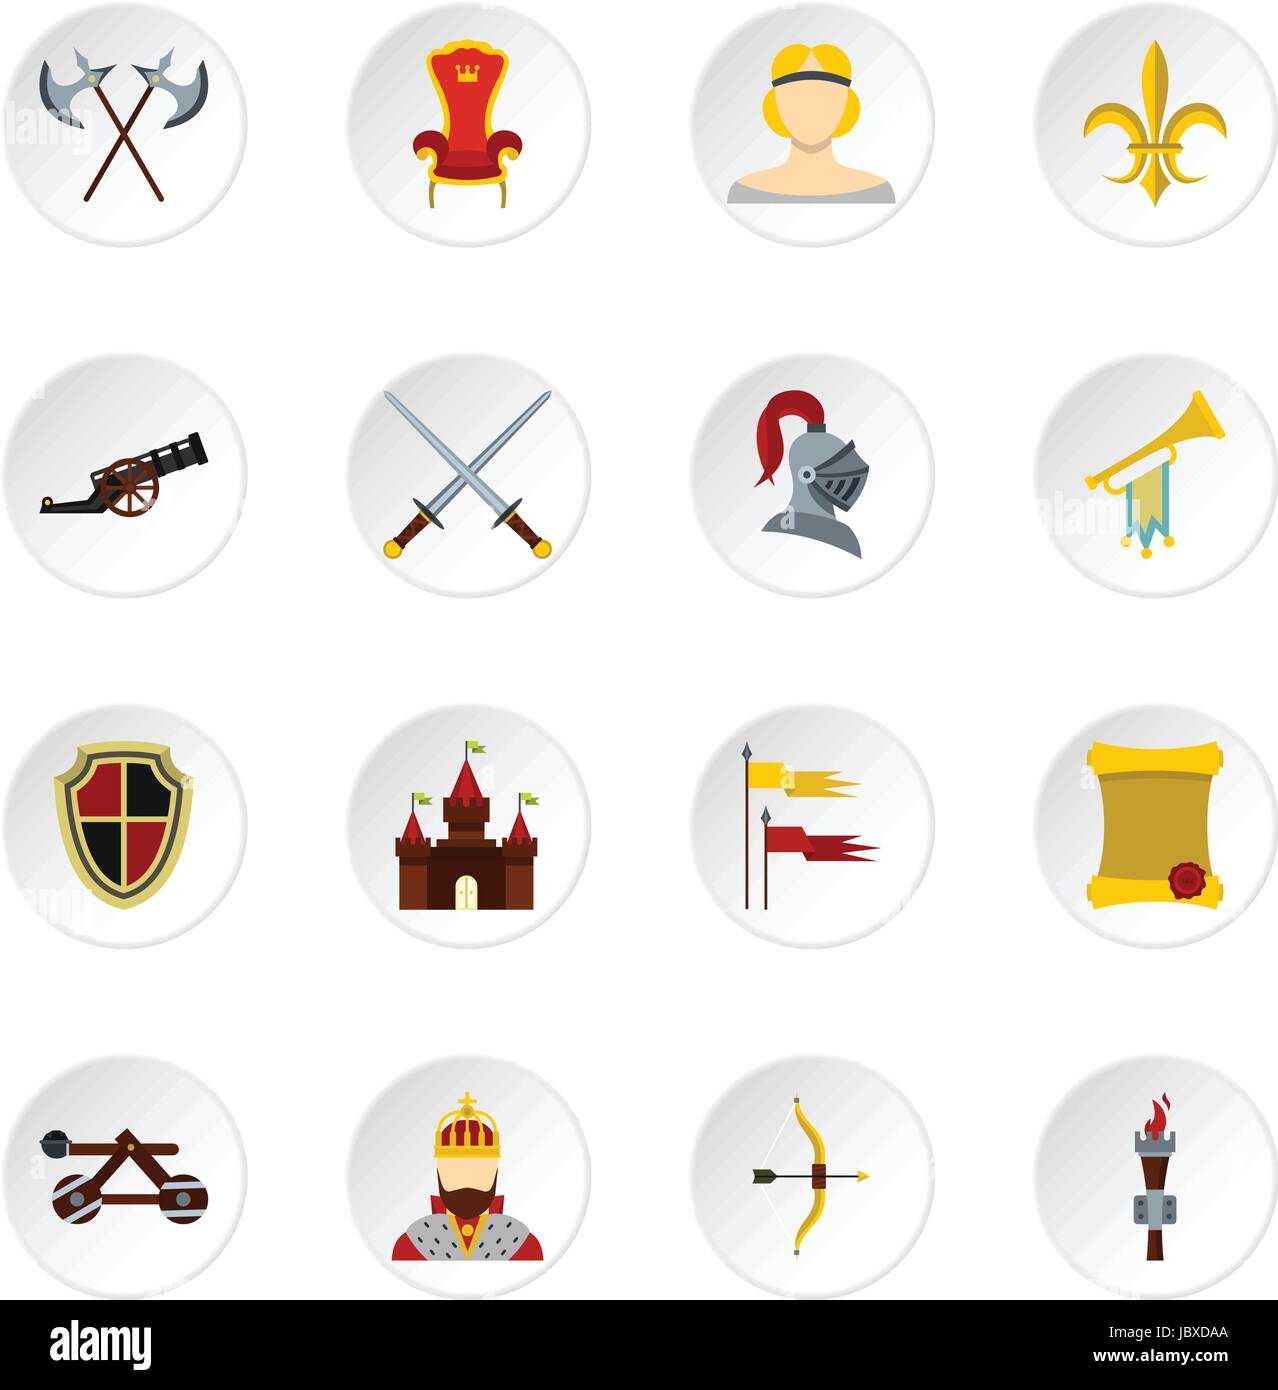 Knight icons set, flat style Stock Vector